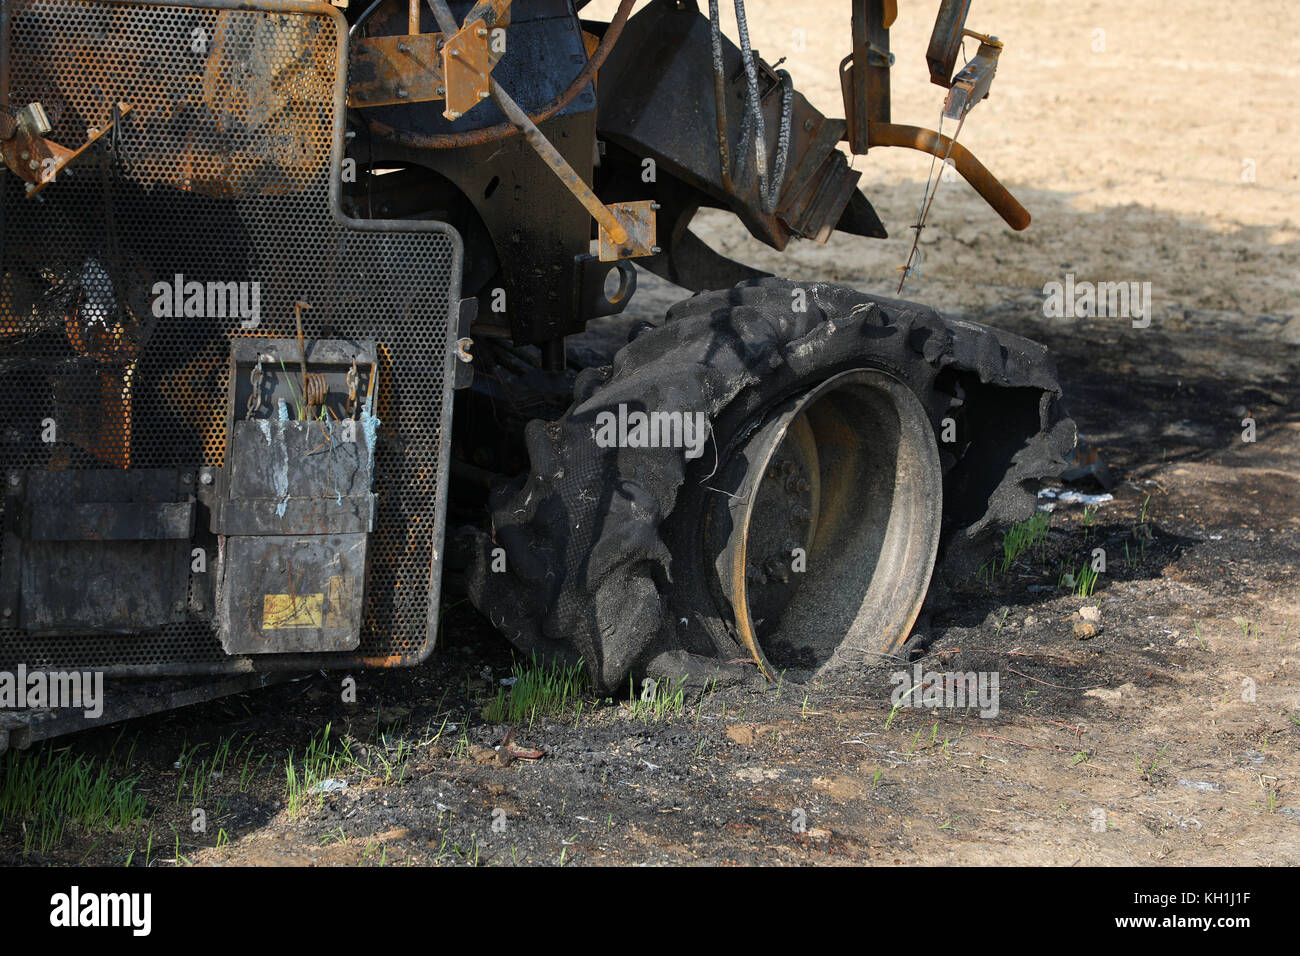 Closeup of combine harvester destroyed by fire Stock Photo